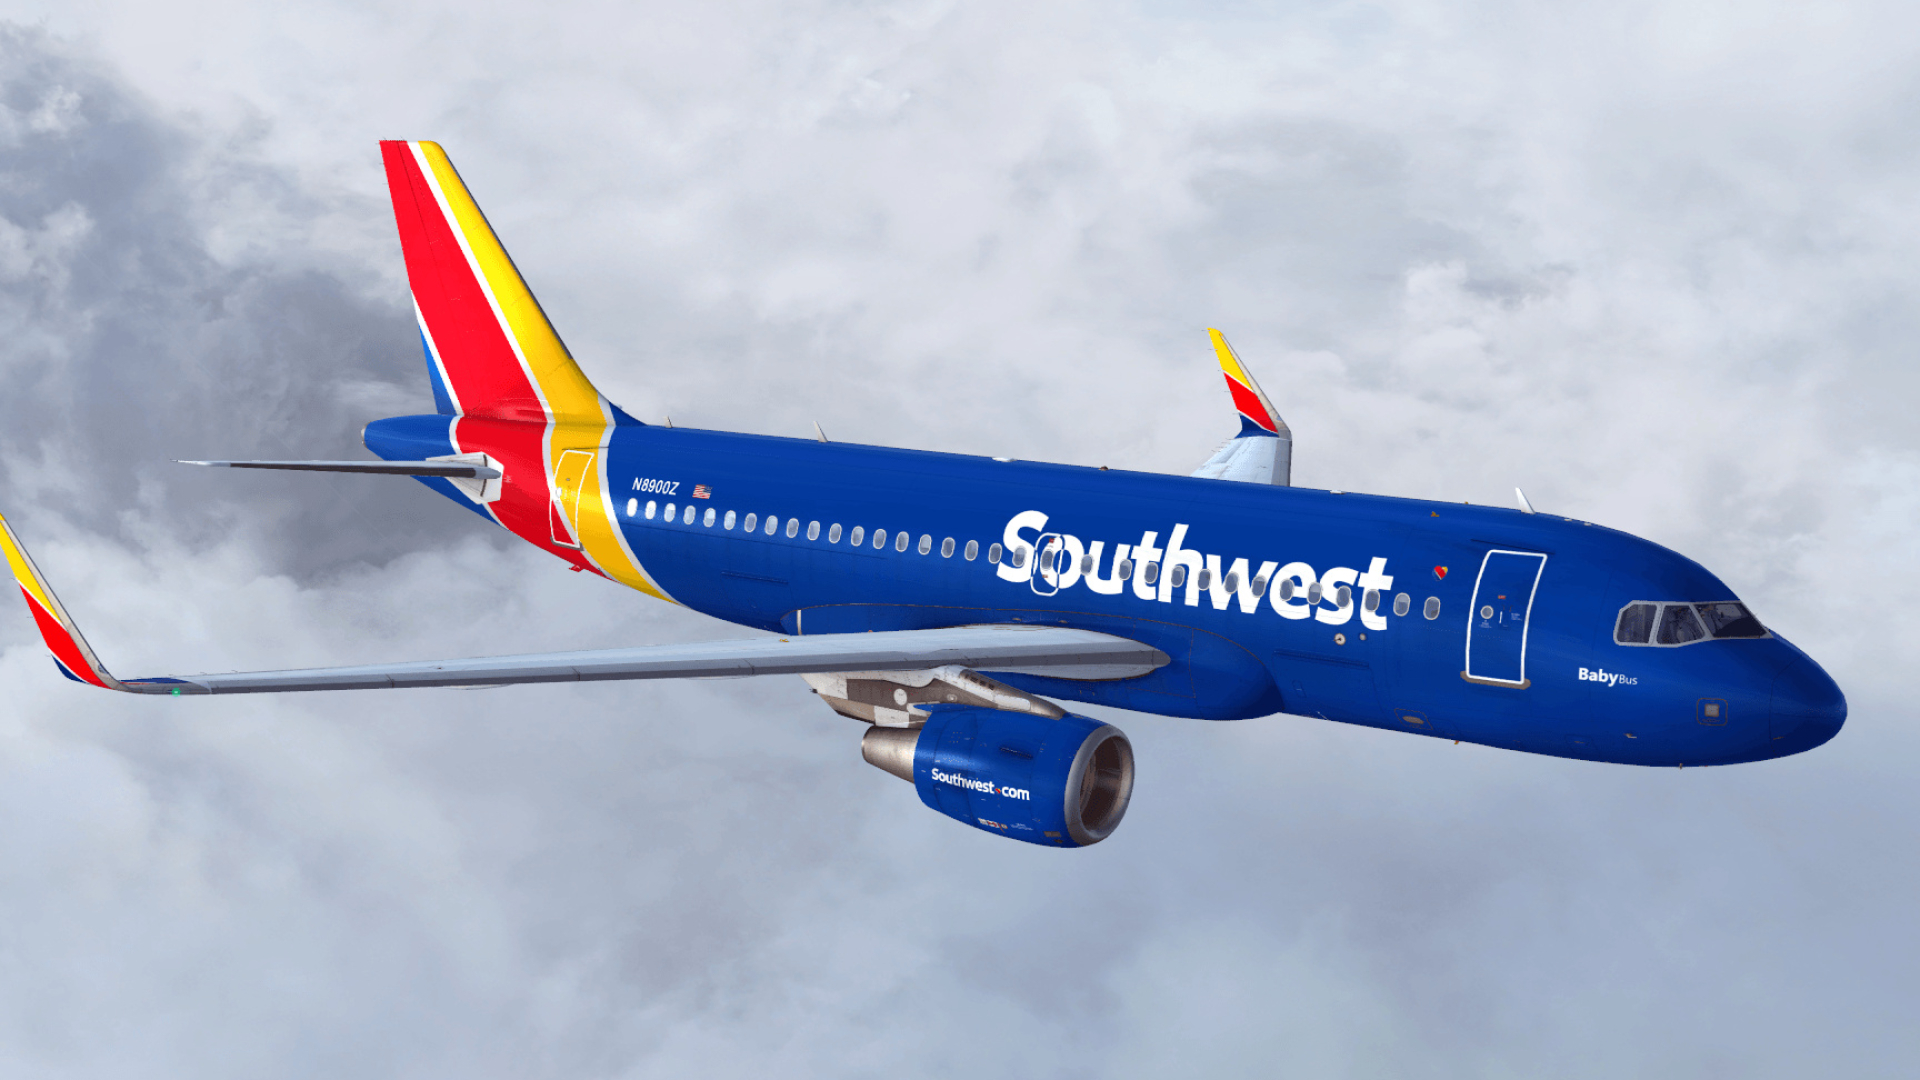 Southwest Airlines, Wallpapers, HD backgrounds, Air travel, 1920x1080 Full HD Desktop